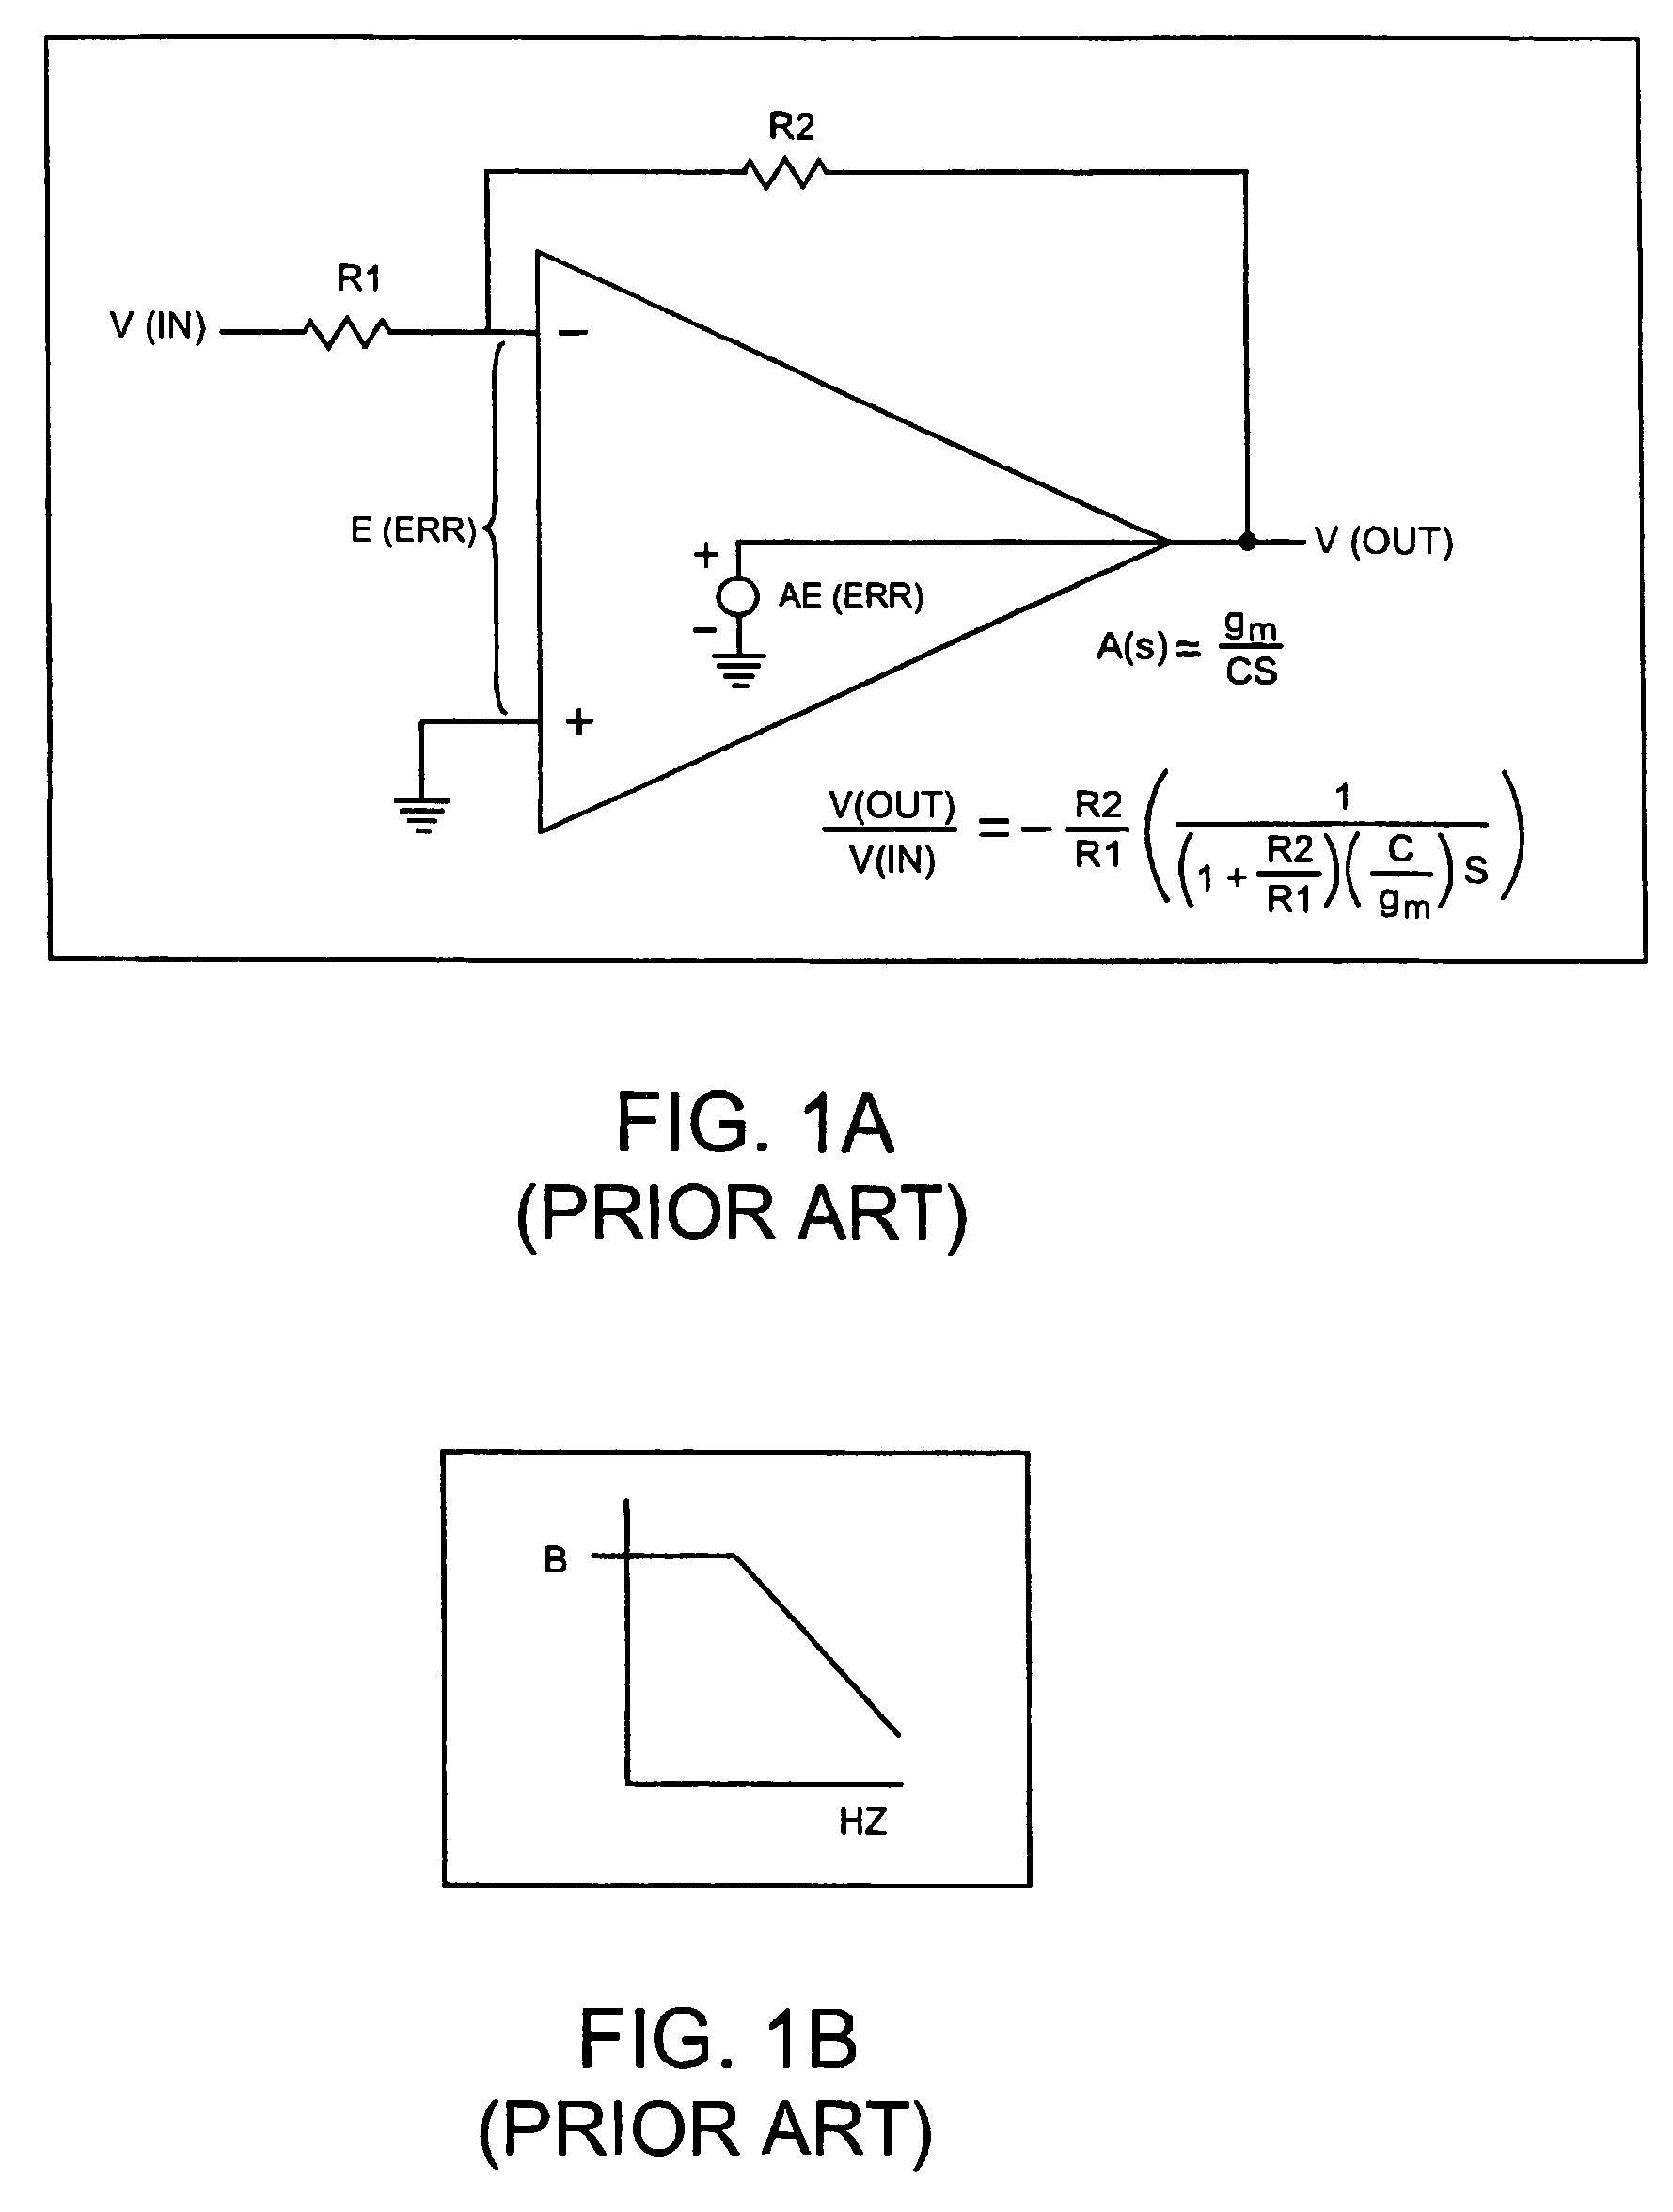 Fully differential current-feedback CMOS/bipolar operational amplifier